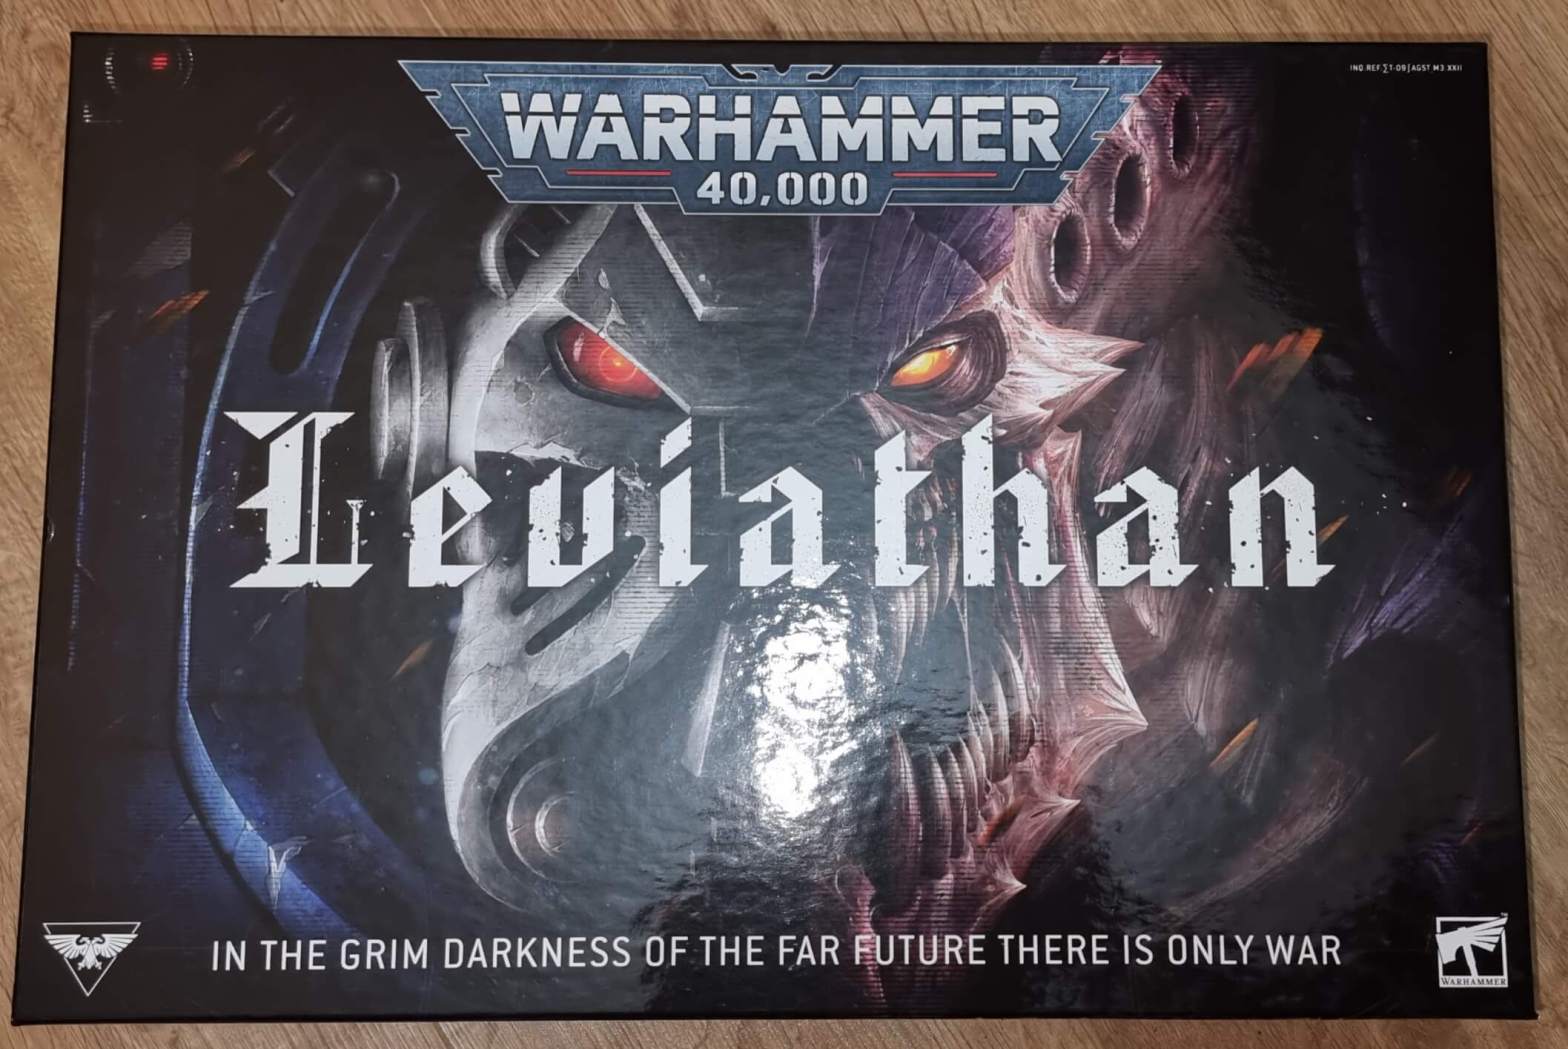 Discover the Marvels of Warhammer 40k Leviathan: 10th Edition